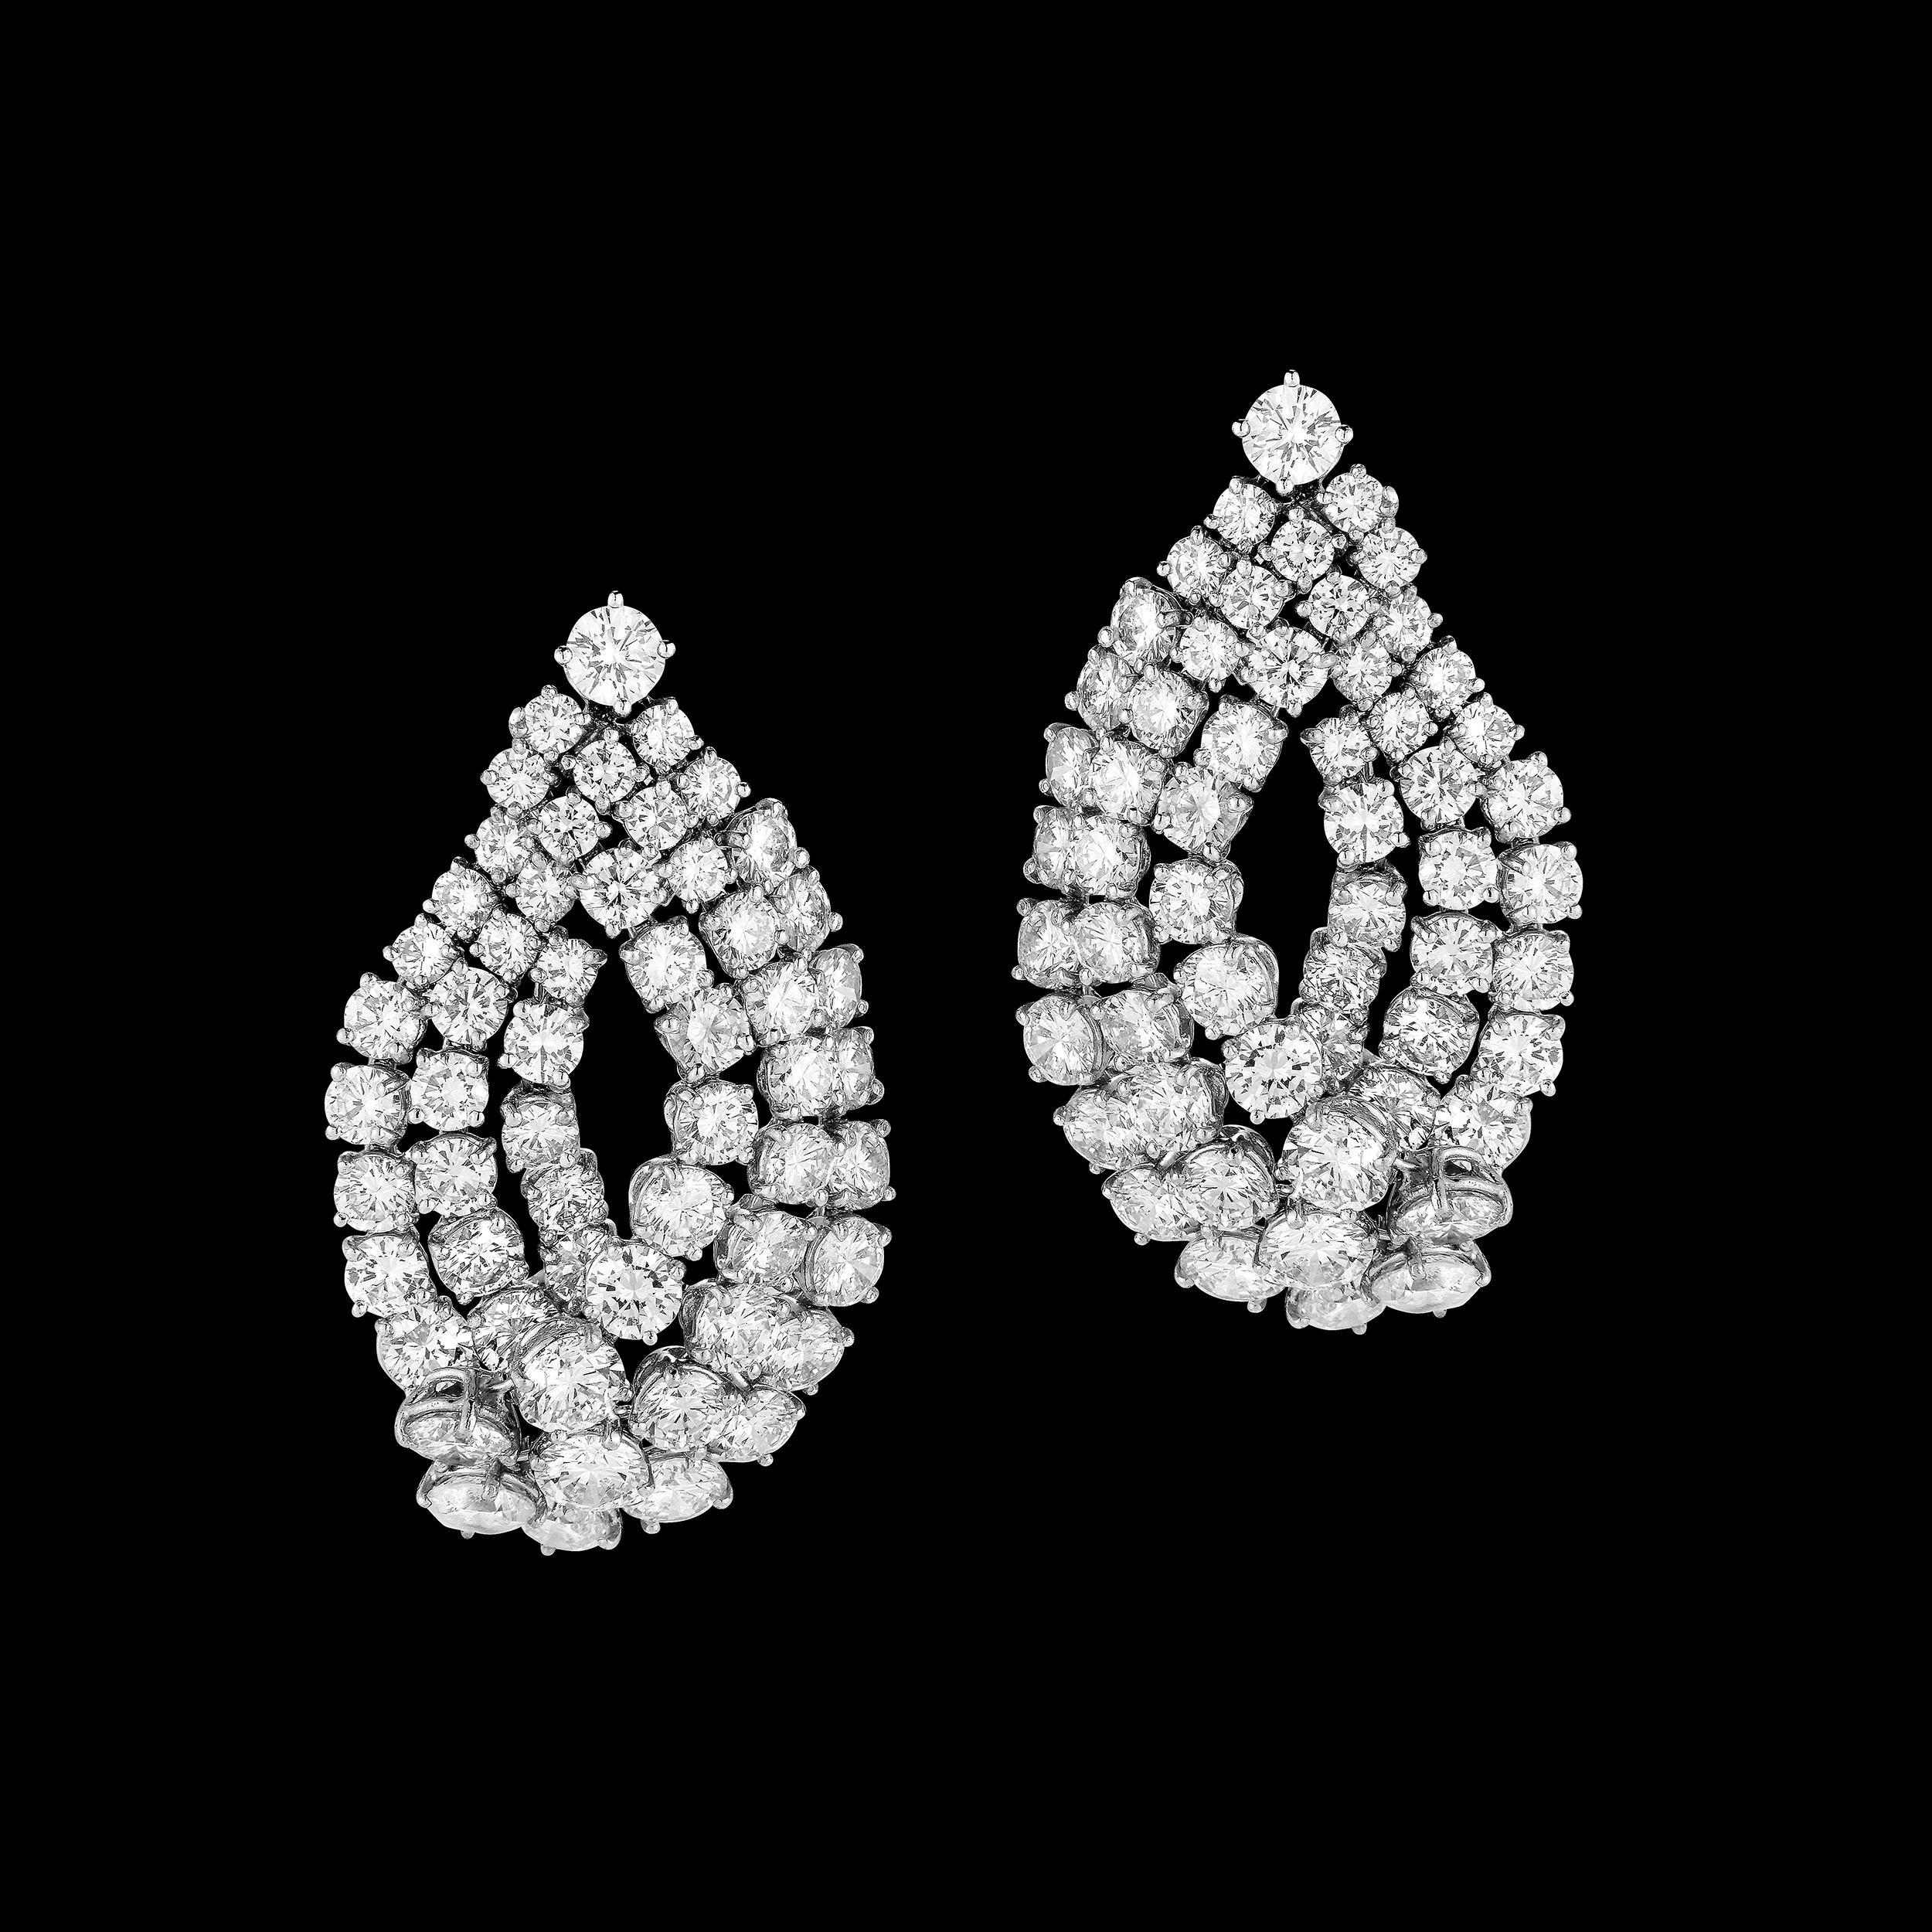 Magnificent Black Tie Platinum and Diamond Earrings, set with 24.05 carat of Diamonds, F color VS1 clarity. Very elegant earrings.